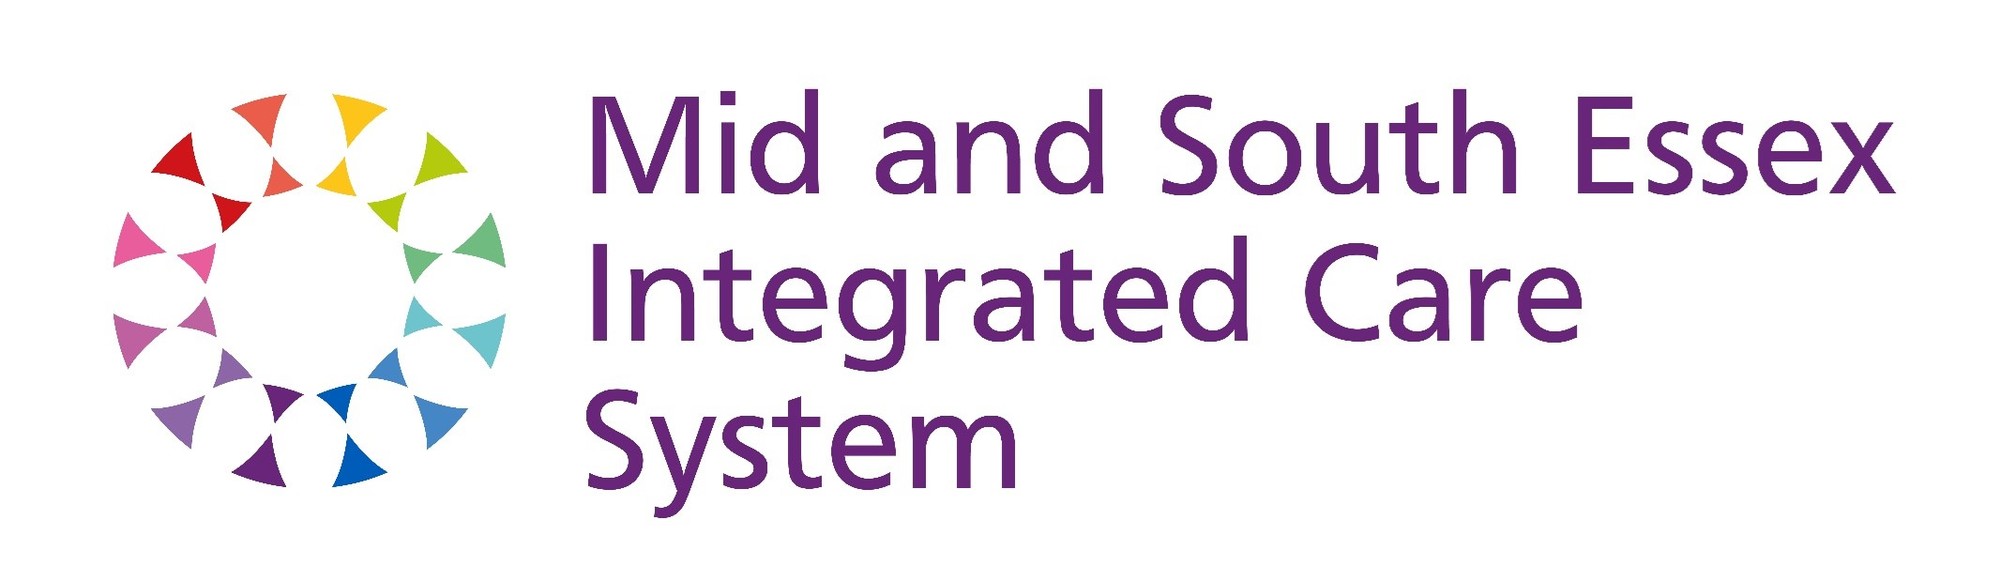 Logo: Mid and South Essex Integrated Care System